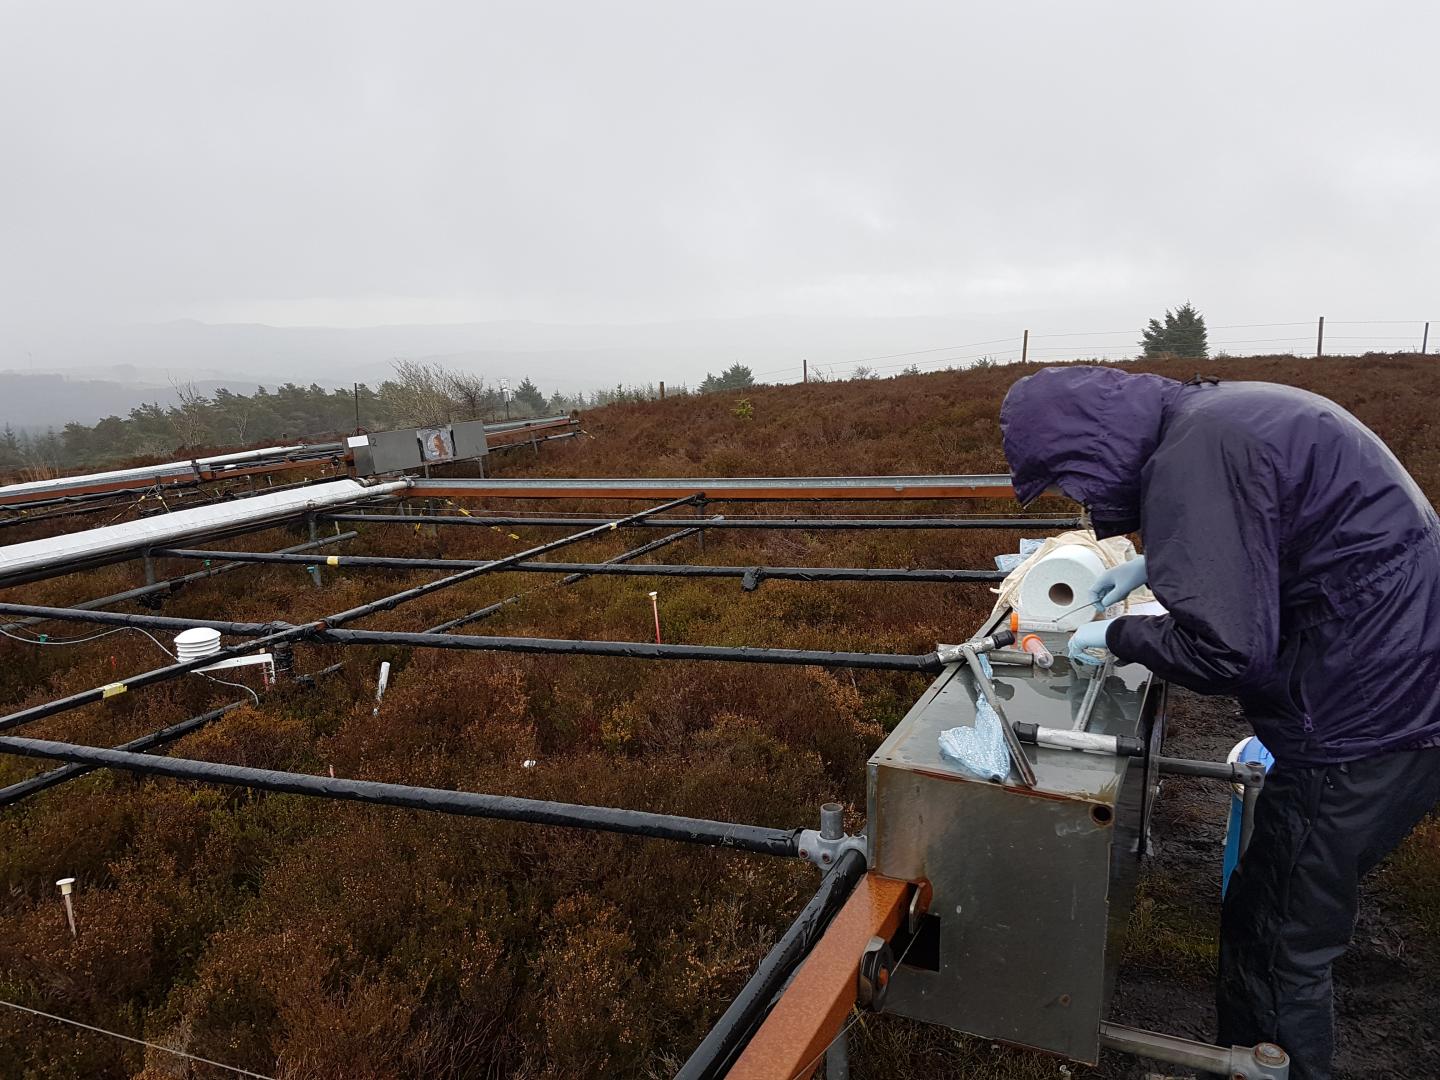 Experimentation at the Cloceanog Forest Site in Wales